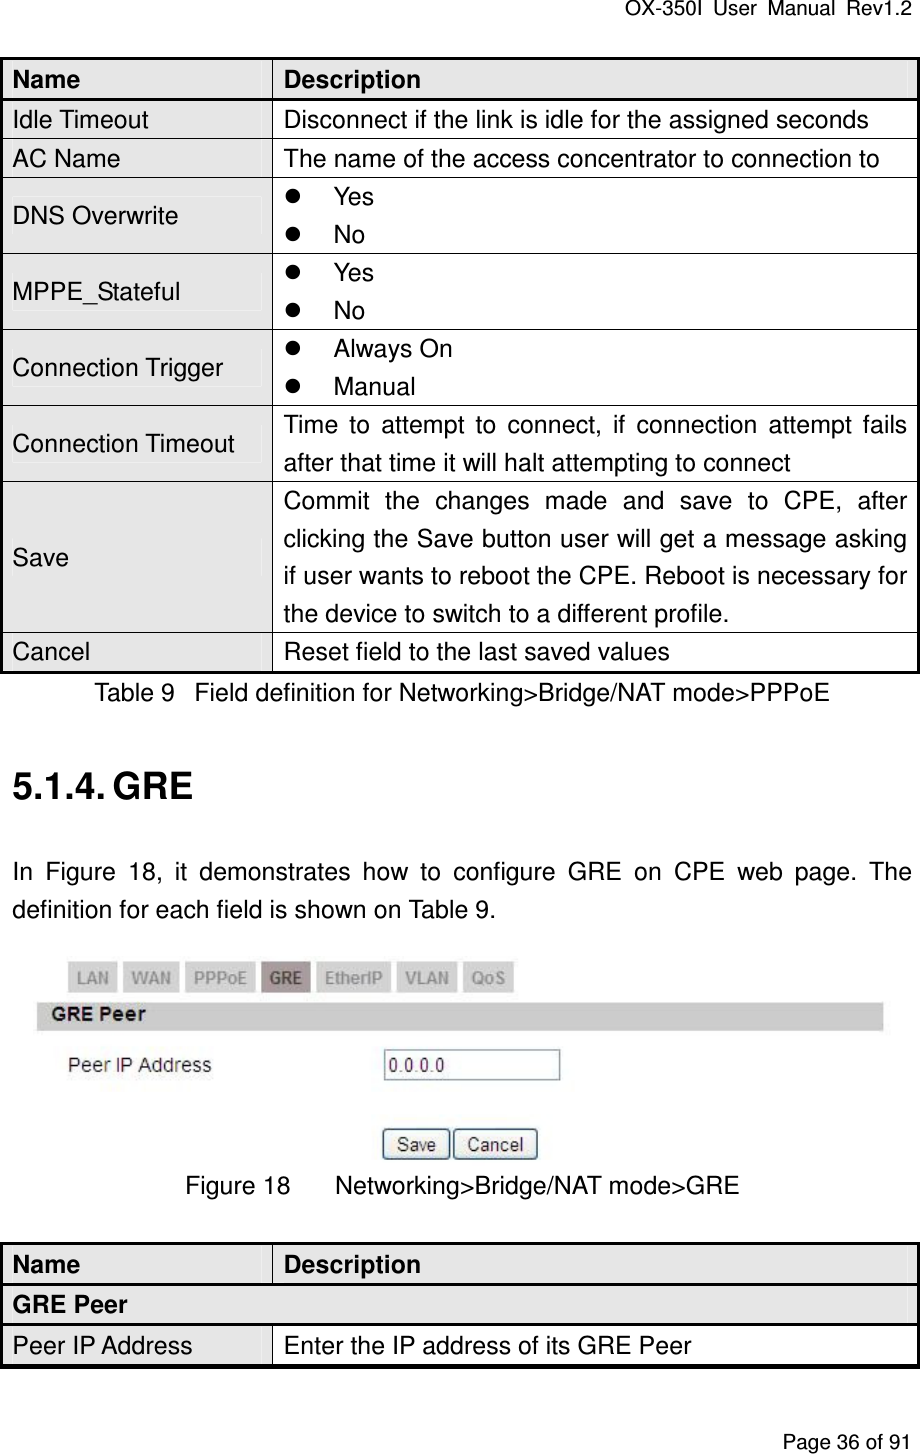 OX-350I  User  Manual  Rev1.2 Page 36 of 91 Name  Description Idle Timeout  Disconnect if the link is idle for the assigned seconds AC Name  The name of the access concentrator to connection to DNS Overwrite   Yes   No MPPE_Stateful   Yes   No Connection Trigger   Always On   Manual Connection Timeout  Time  to  attempt  to  connect,  if  connection  attempt  fails after that time it will halt attempting to connect Save Commit  the  changes  made  and  save  to  CPE,  after clicking the Save button user will get a message asking if user wants to reboot the CPE. Reboot is necessary for the device to switch to a different profile. Cancel  Reset field to the last saved values Table 9  Field definition for Networking&gt;Bridge/NAT mode&gt;PPPoE 5.1.4. GRE In  Figure  18,  it  demonstrates  how  to  configure  GRE  on  CPE  web  page.  The definition for each field is shown on Table 9.  Figure 18  Networking&gt;Bridge/NAT mode&gt;GRE Name  Description GRE Peer Peer IP Address  Enter the IP address of its GRE Peer 